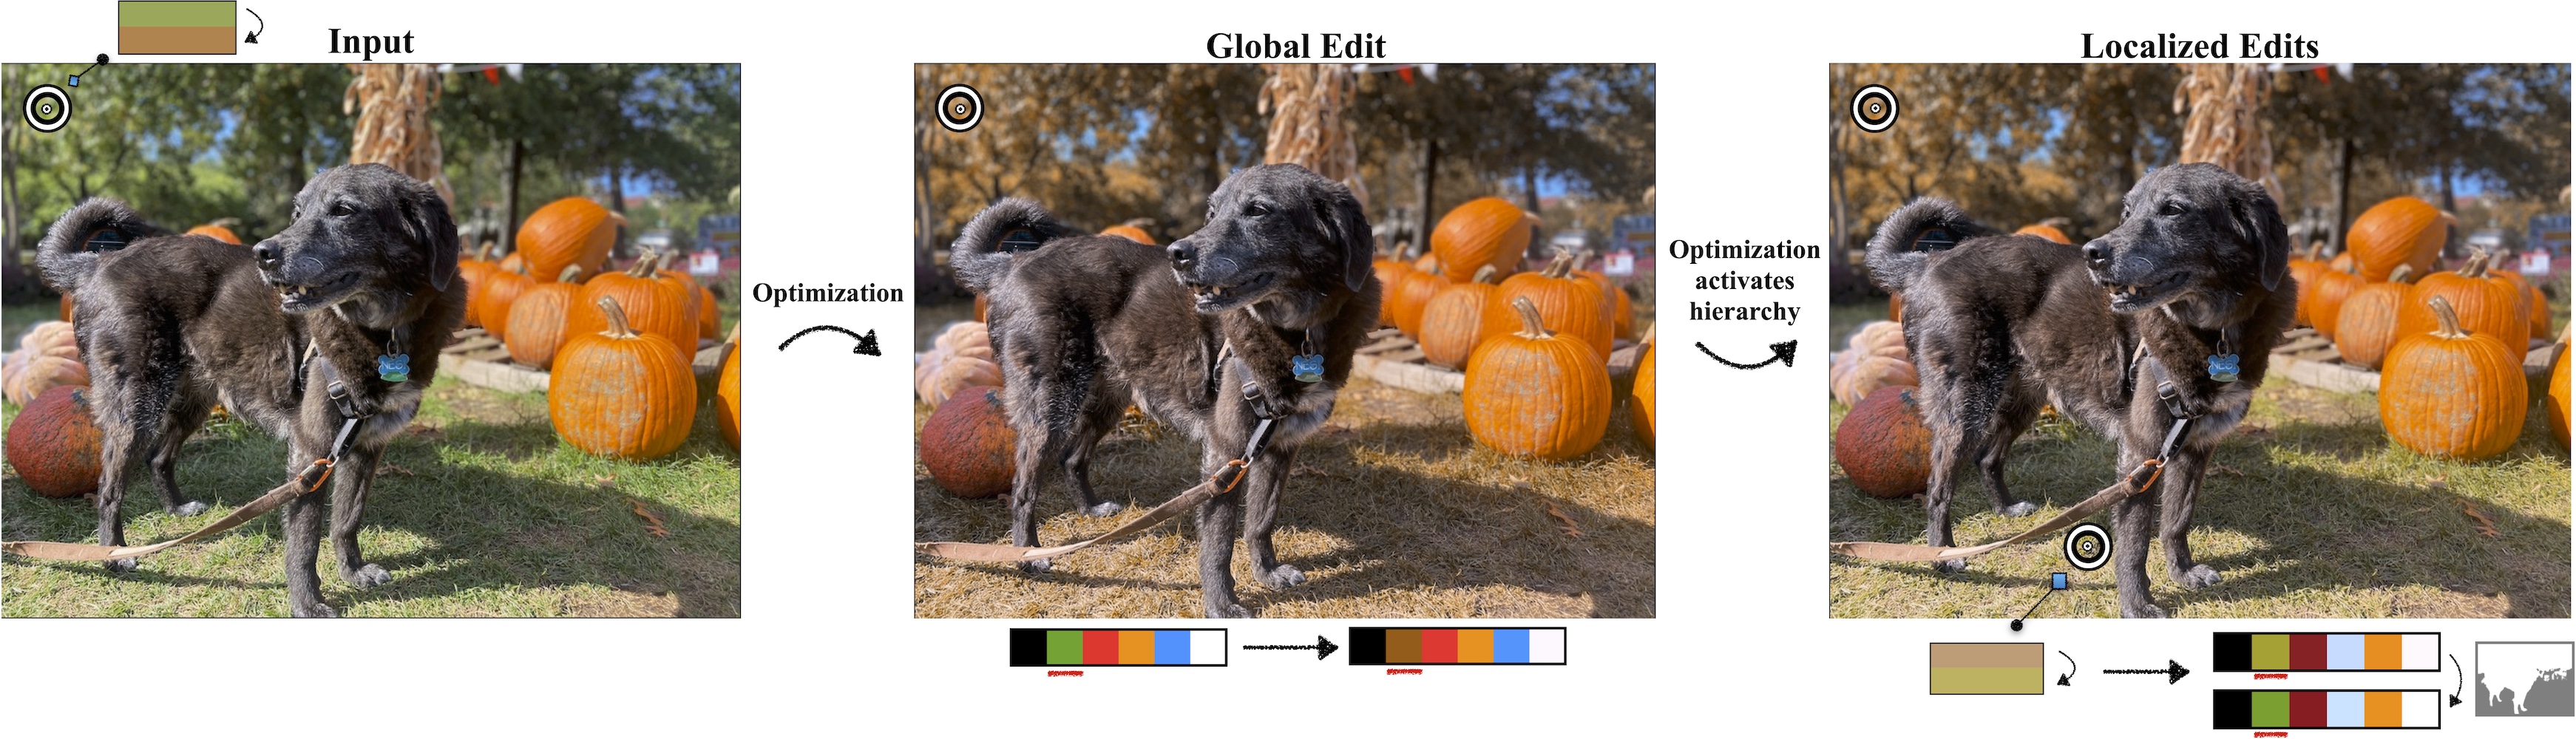 An example image edited using LoCoPalettes. On the left we see a photograph labeled Input. The photograph is of a dog standing on green grass with pumpkins and trees visible in the background. A point on a green leaf in the background has been selected and its color constrained to change from brown to green. An arrow labeled Optimization connects the photograph to a modified version labeled Global Edit. In this photograph, the leaf in the background and the grass have both become brown. A six-color palette swatch below the image shows that the green color in the palette has become brown. An arrow labeled Optimization activates hierachy connects this center photograph to another modified photograph on the right. The photograph on the right is labeled Localized Edits. We see a point in the grass has been selected and its color constrained to a pale green. The grass has changed from the brown in the middle photograph to pale green. An arrow from the constraint points to two more copies of the palette, showing a palette changing from one set of colors to another. A small greyscale image next to these palettes is black where the grass is and white elsewhere.